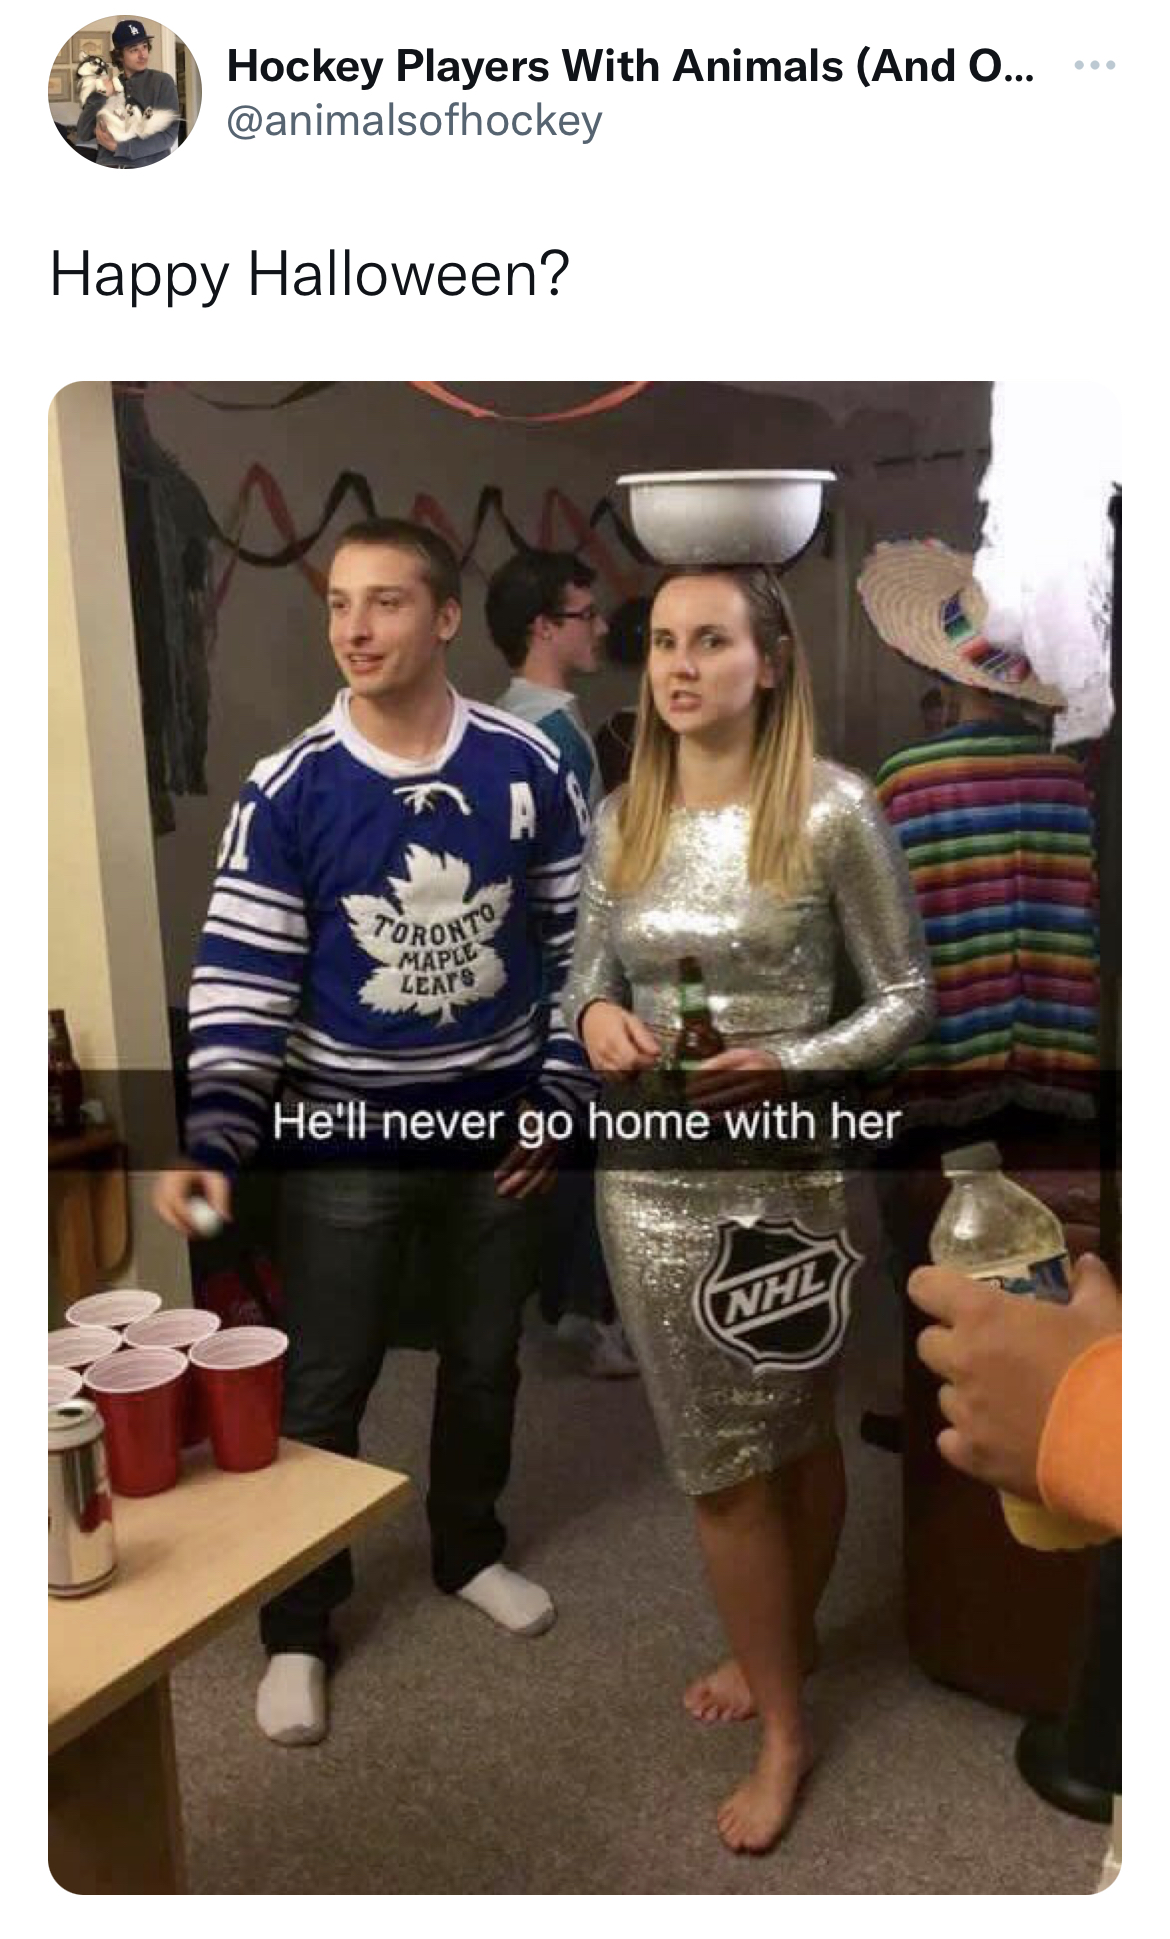 Tweets roasting celebs - t shirt - Hockey Players With Animals And O... Happy Halloween? Toron Maple Leat He'll never go home with her Nhl